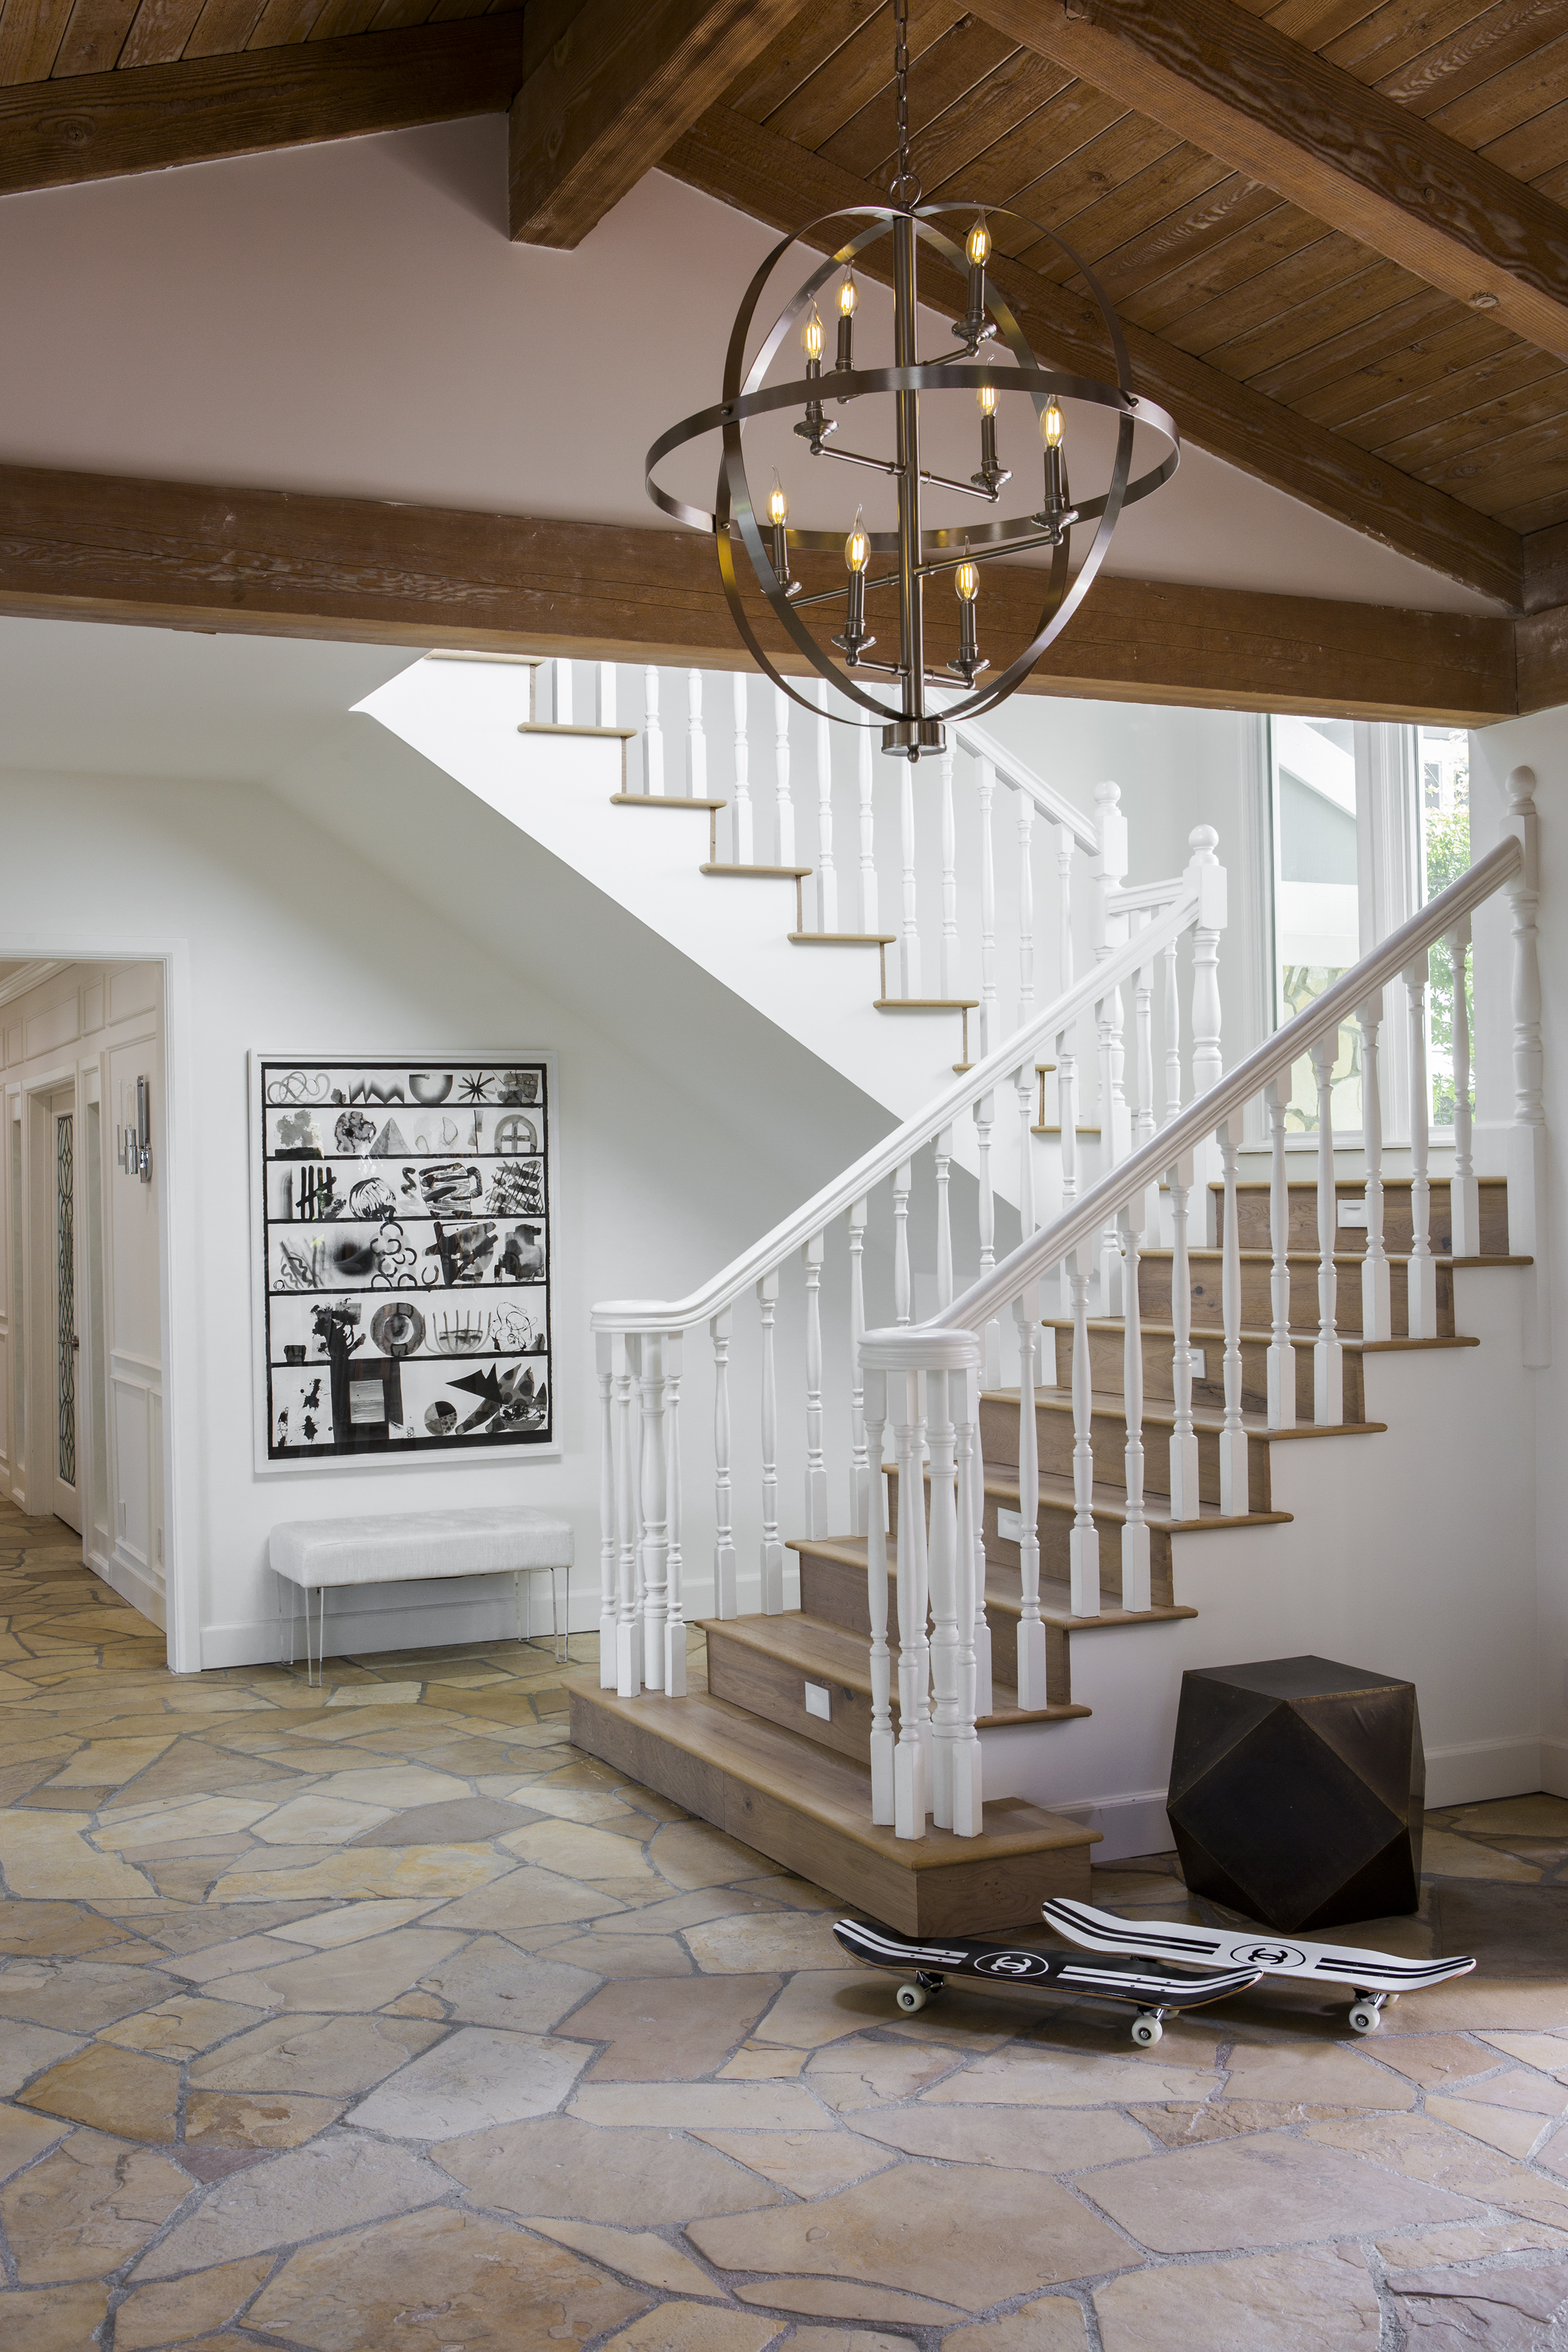 The entryway chandeliers are also from Lamps Plus: The Hudson Valley manufactured Bari chandelier in polished nickel was the perfect fixture to add some glamour to the California Ranch home.